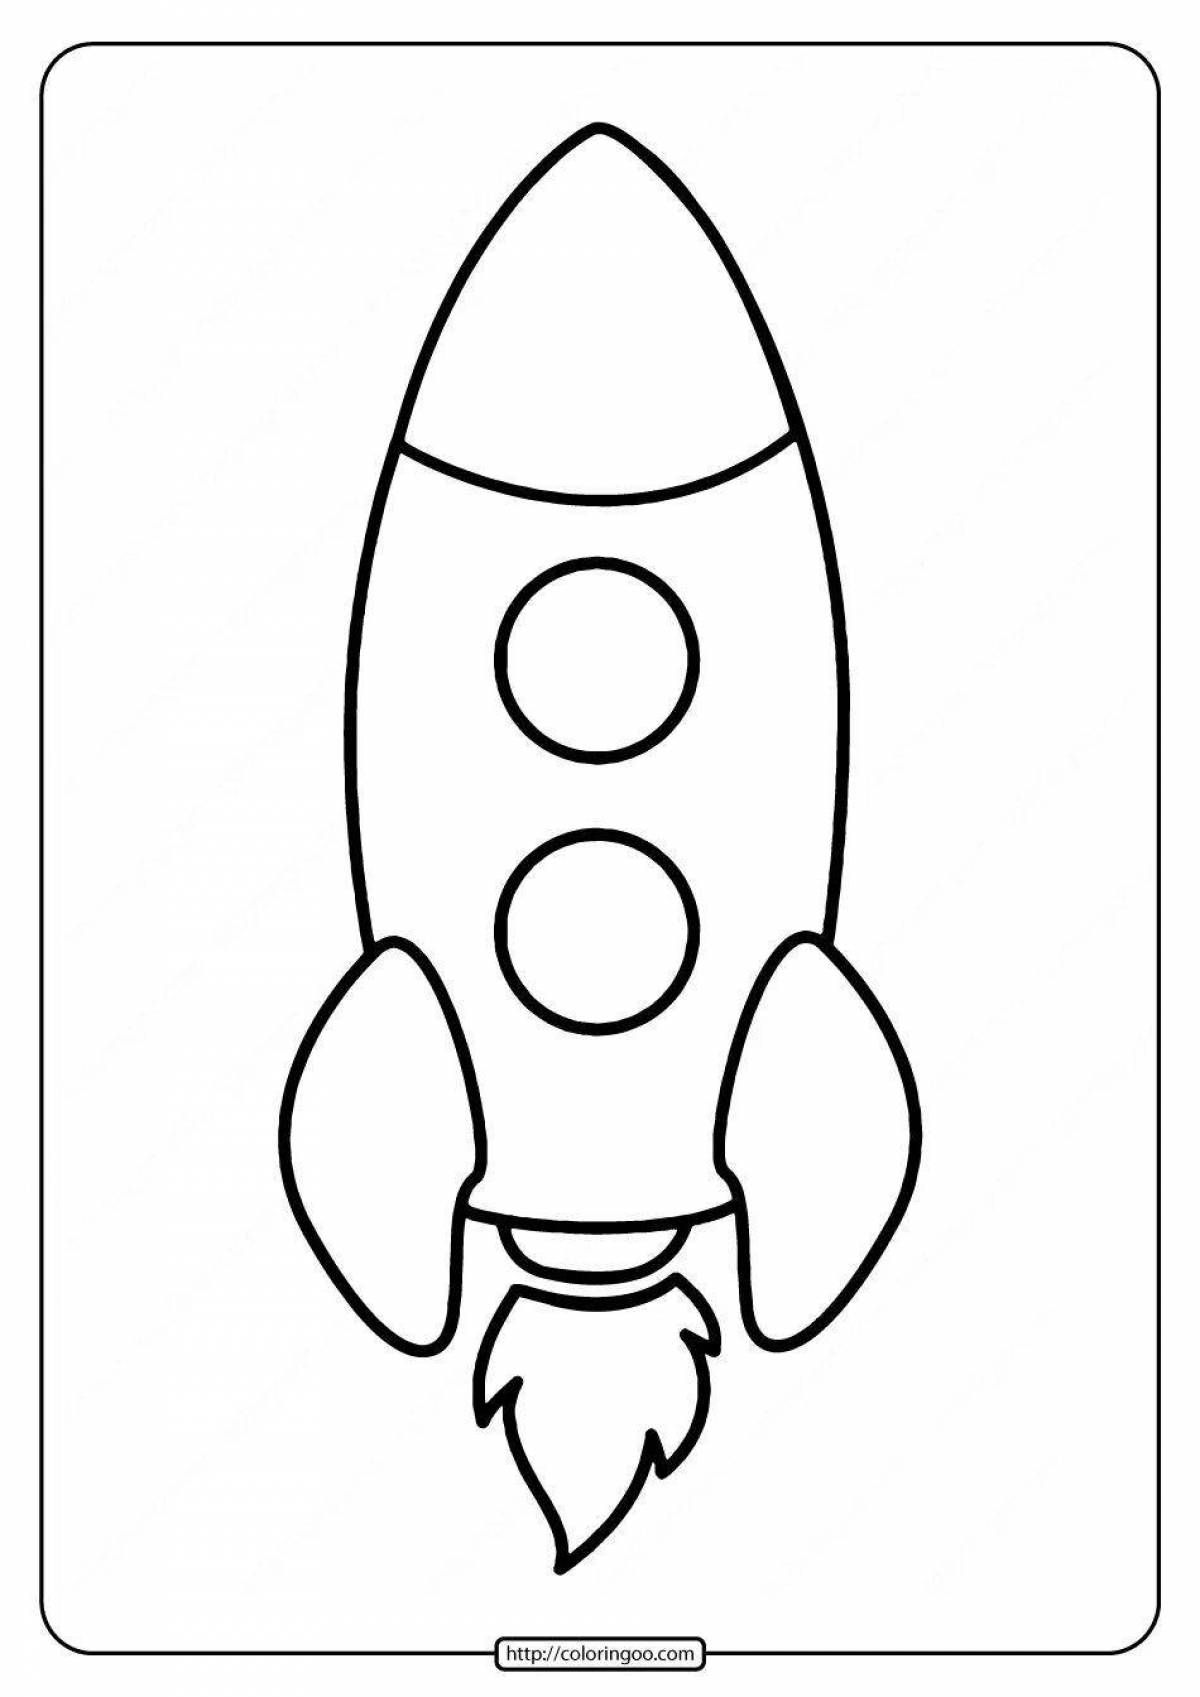 Lovely rocket coloring page for 3-4 year olds